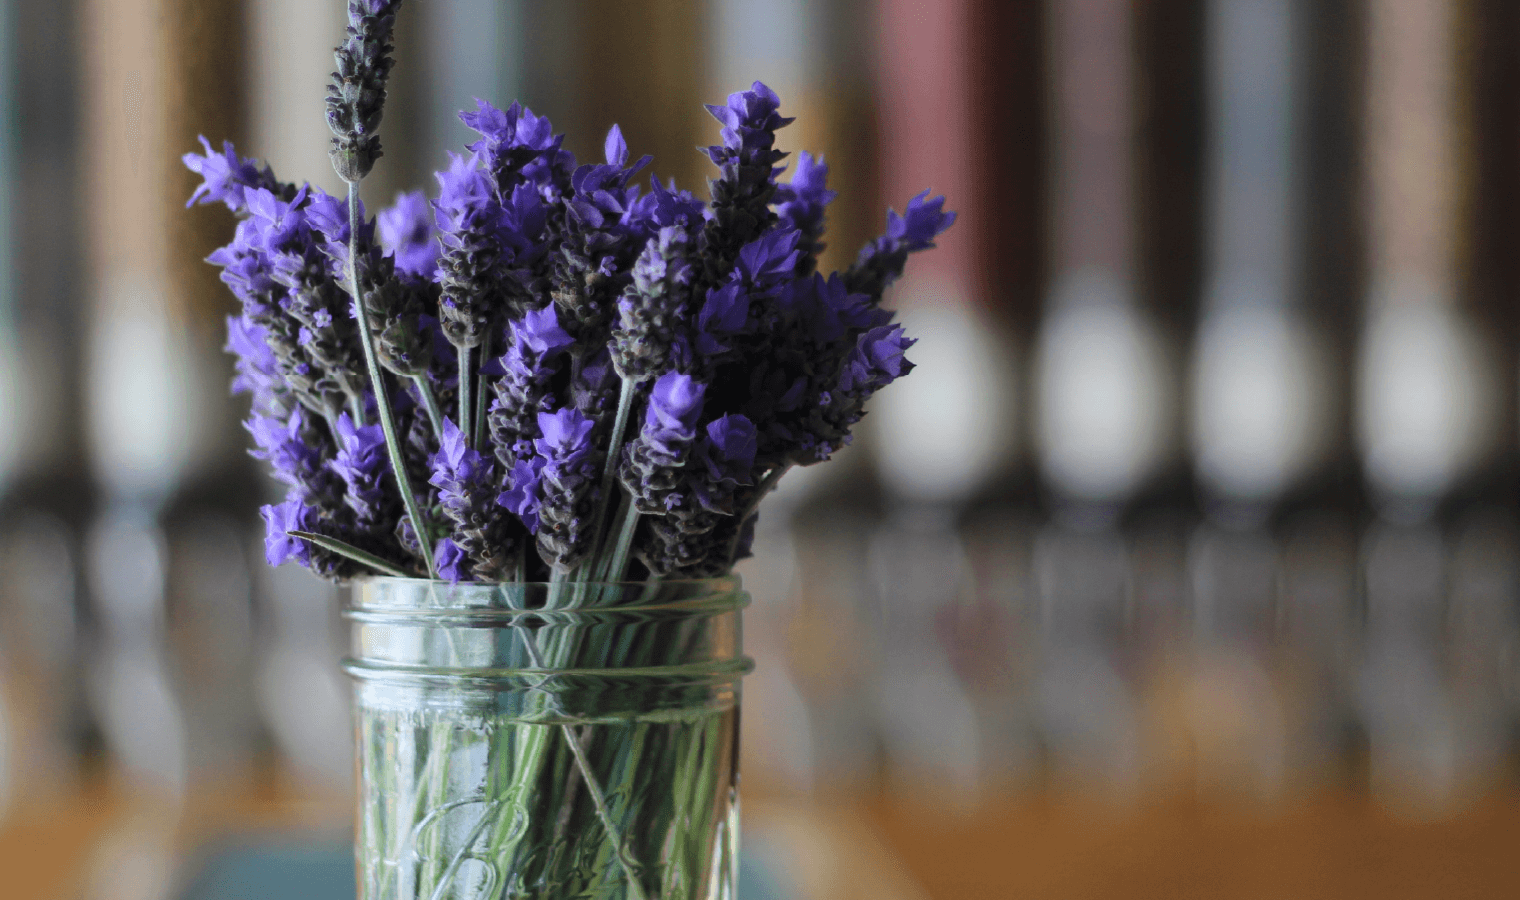 An image of a lavender plant which is purple and pretty and smells real nice